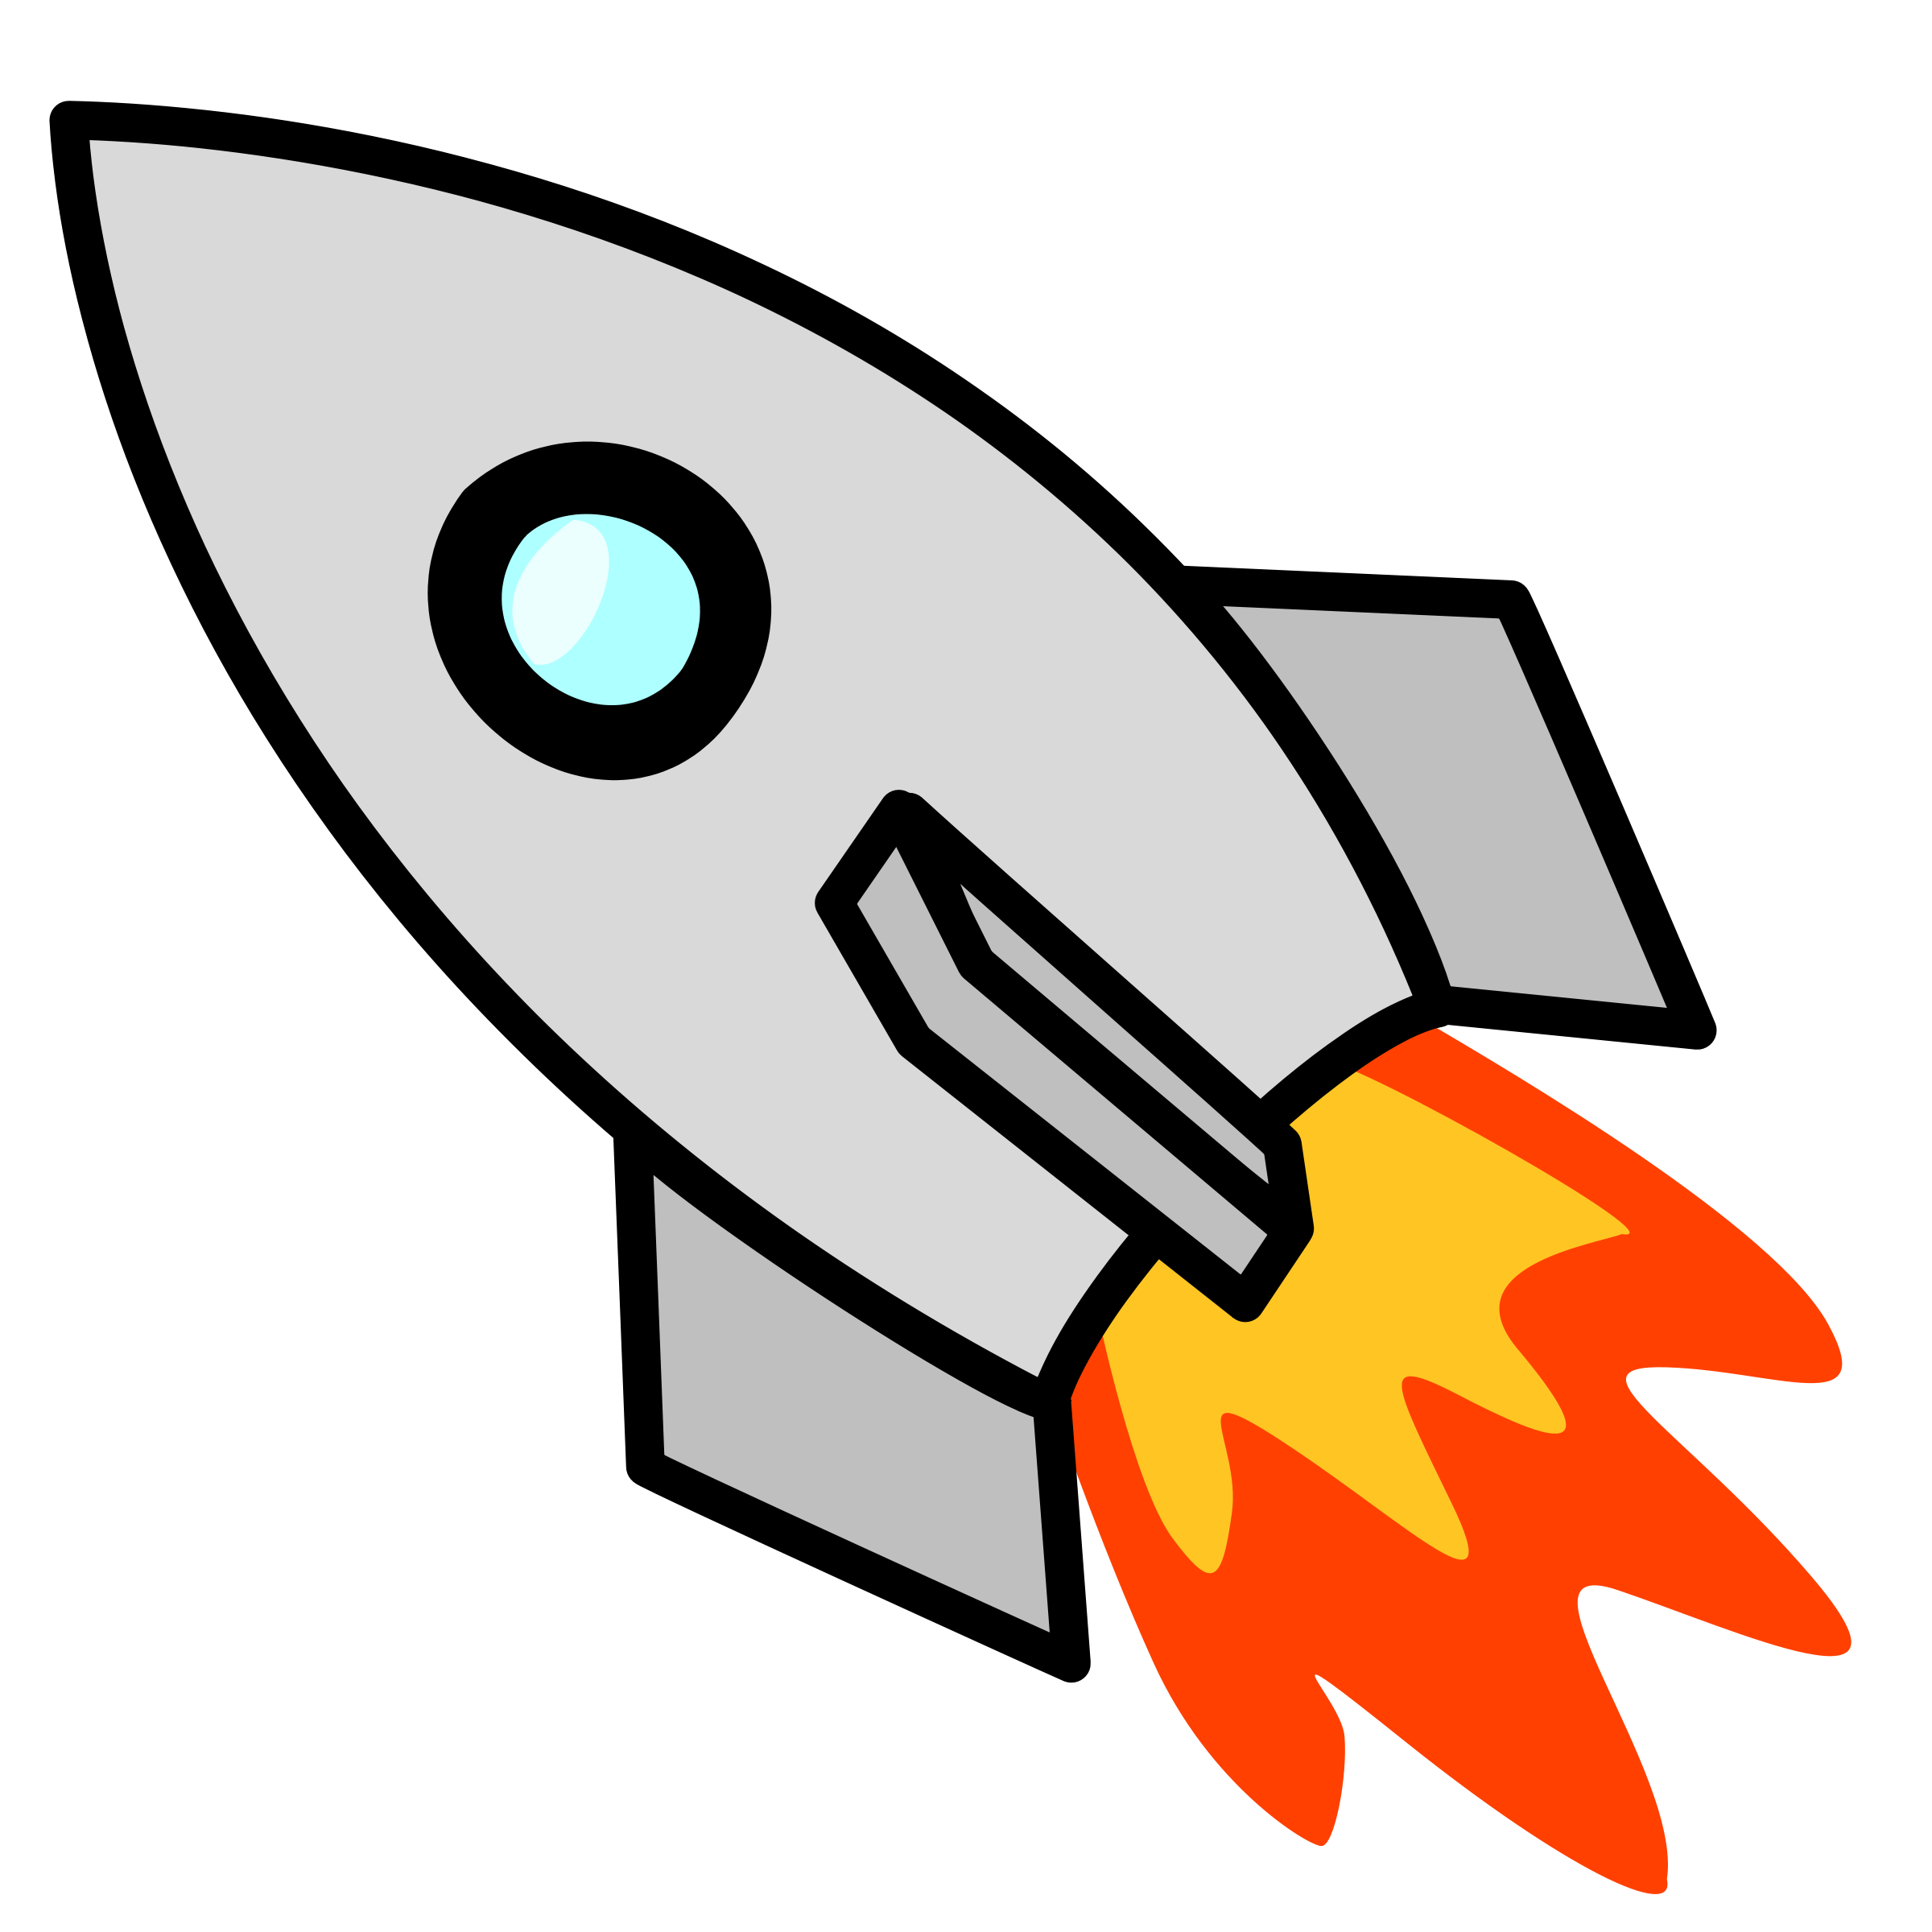 Free Rocket Cartoon Image, Download Free Clip Art, Free Clip Art on Clipart Library